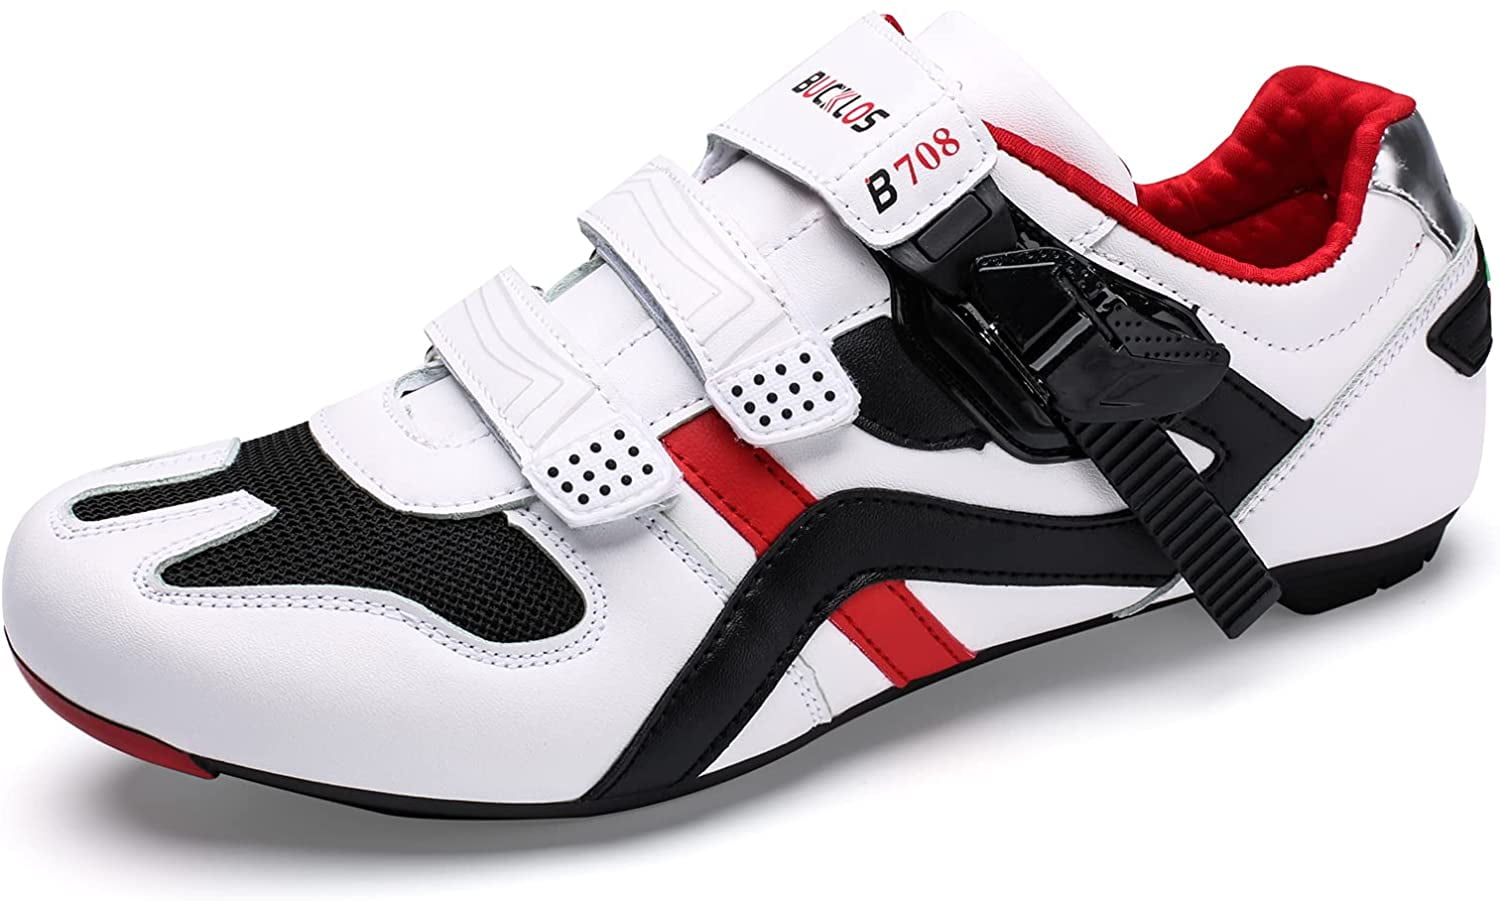 BUCKLOS Cycling Shoes fit Peloton LOOK Delta System Mens Road Bike Cleat Sneaker 